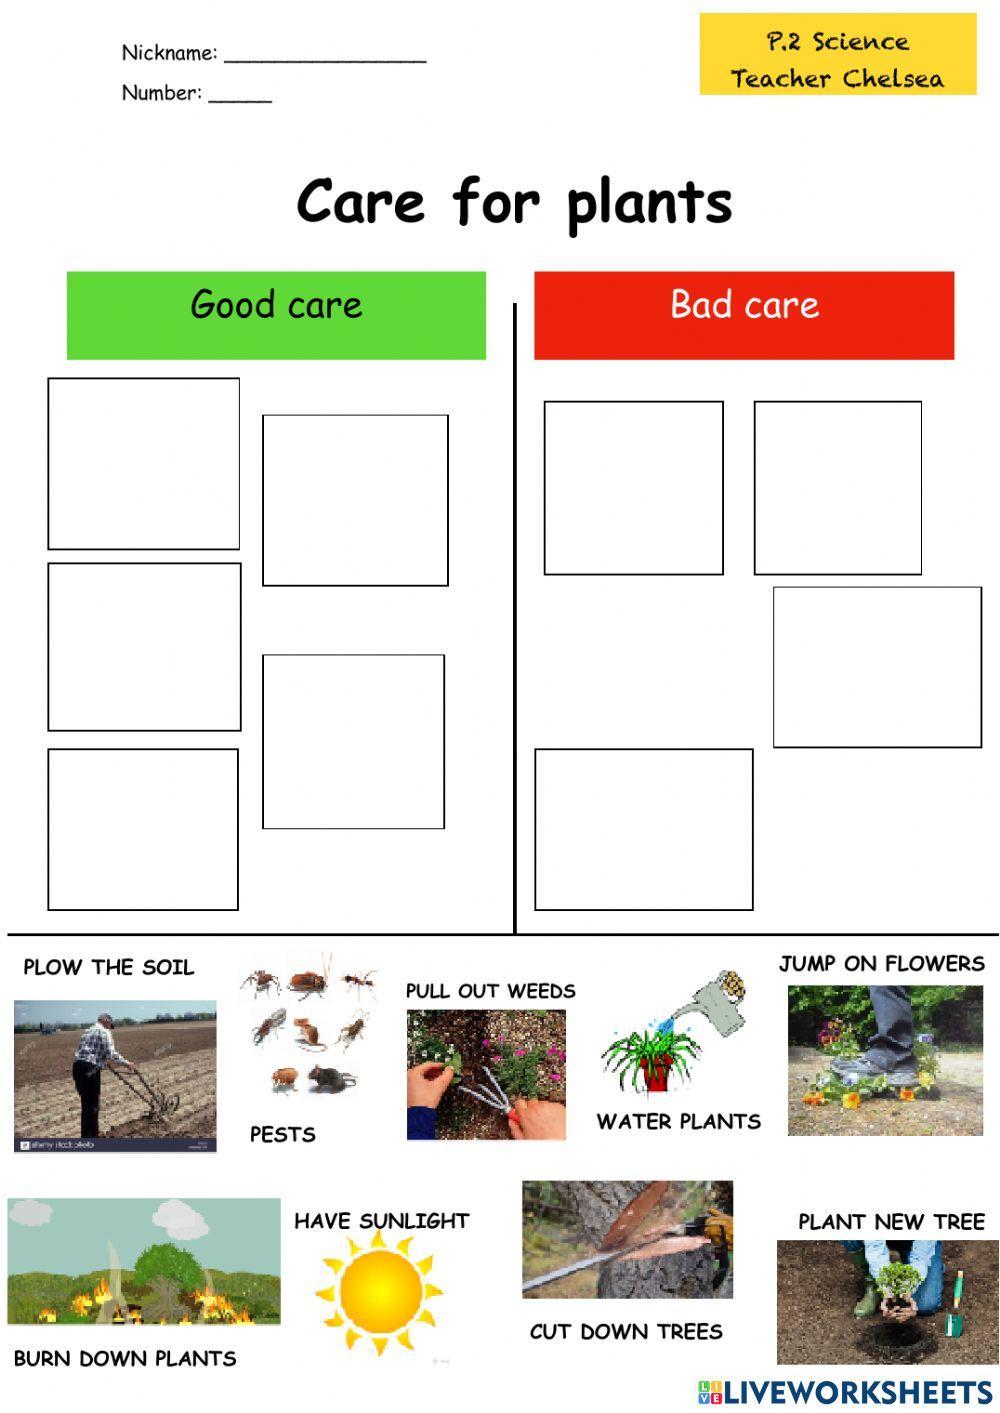 Care for plants